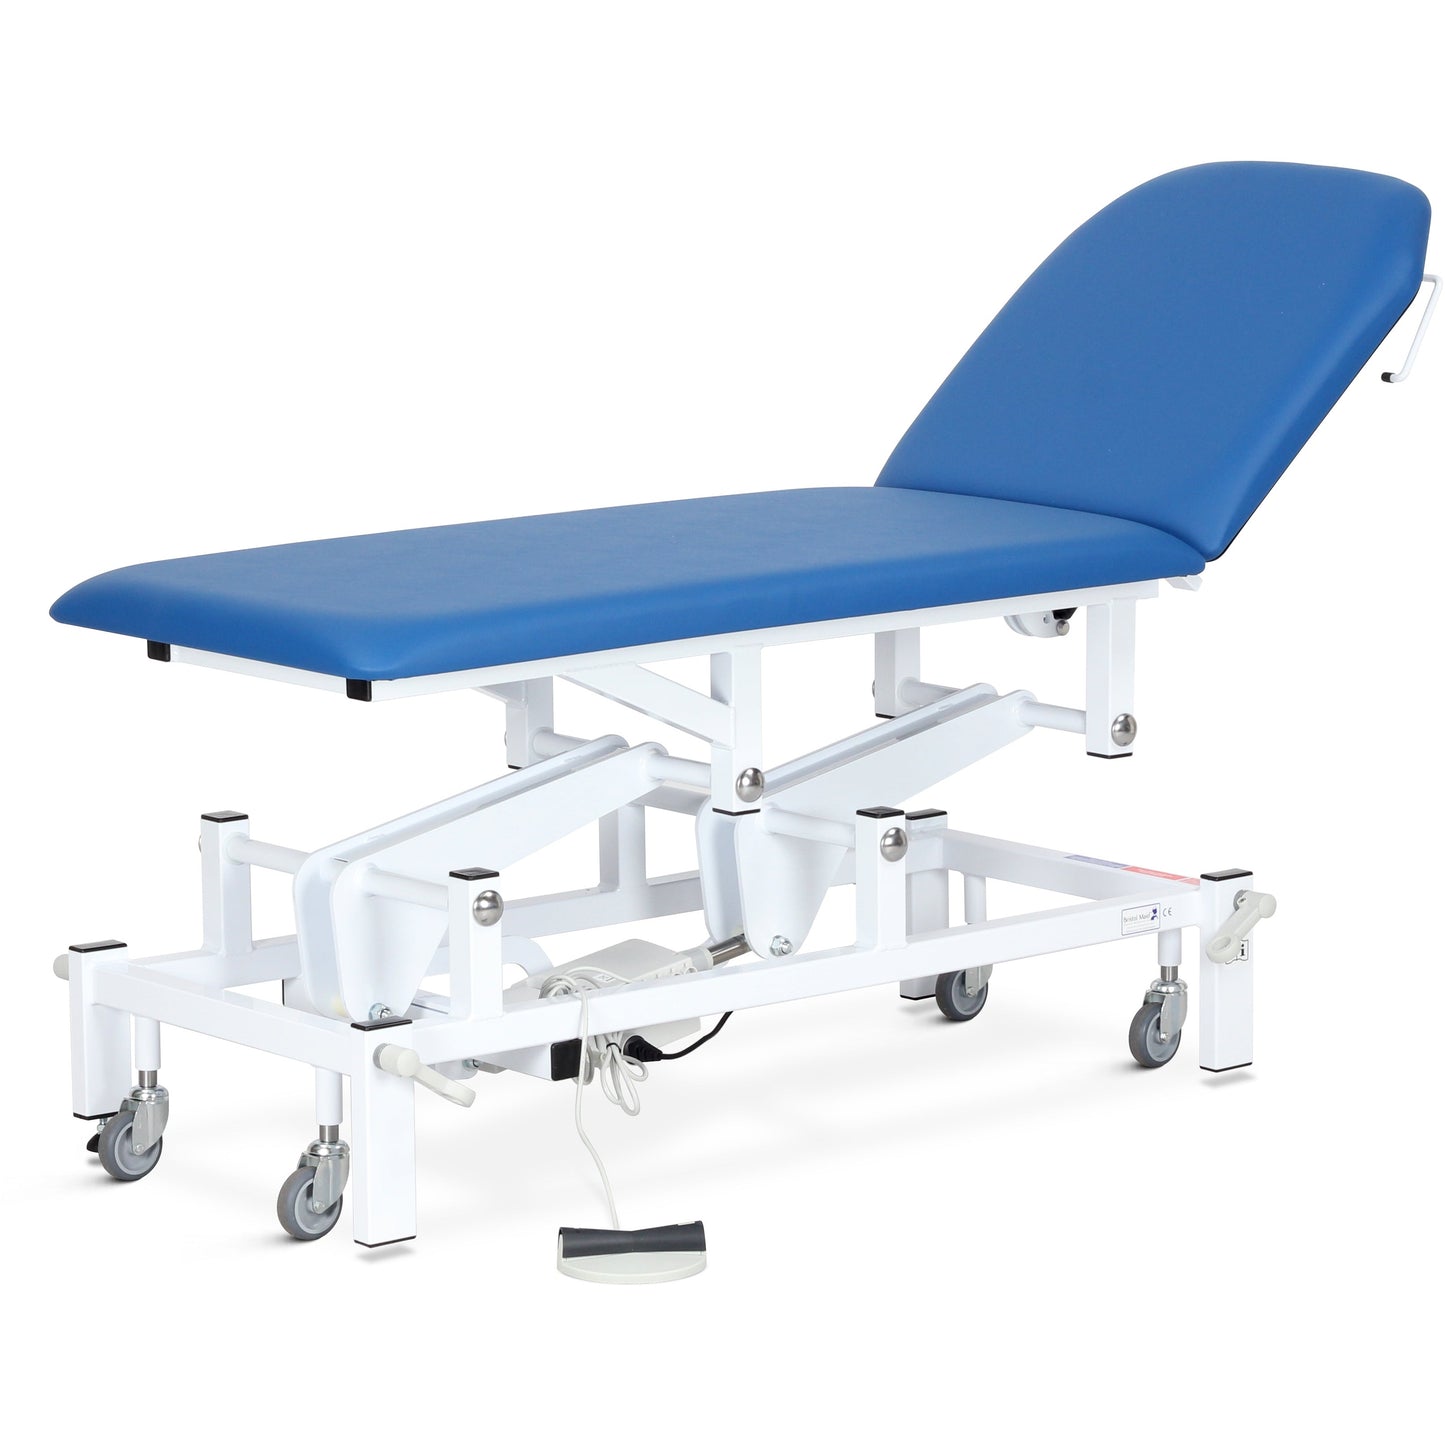 Two Section Examination / Treatment Couch - Variable Height - Electric - Footswitch - Vinyl - Bristol Blue